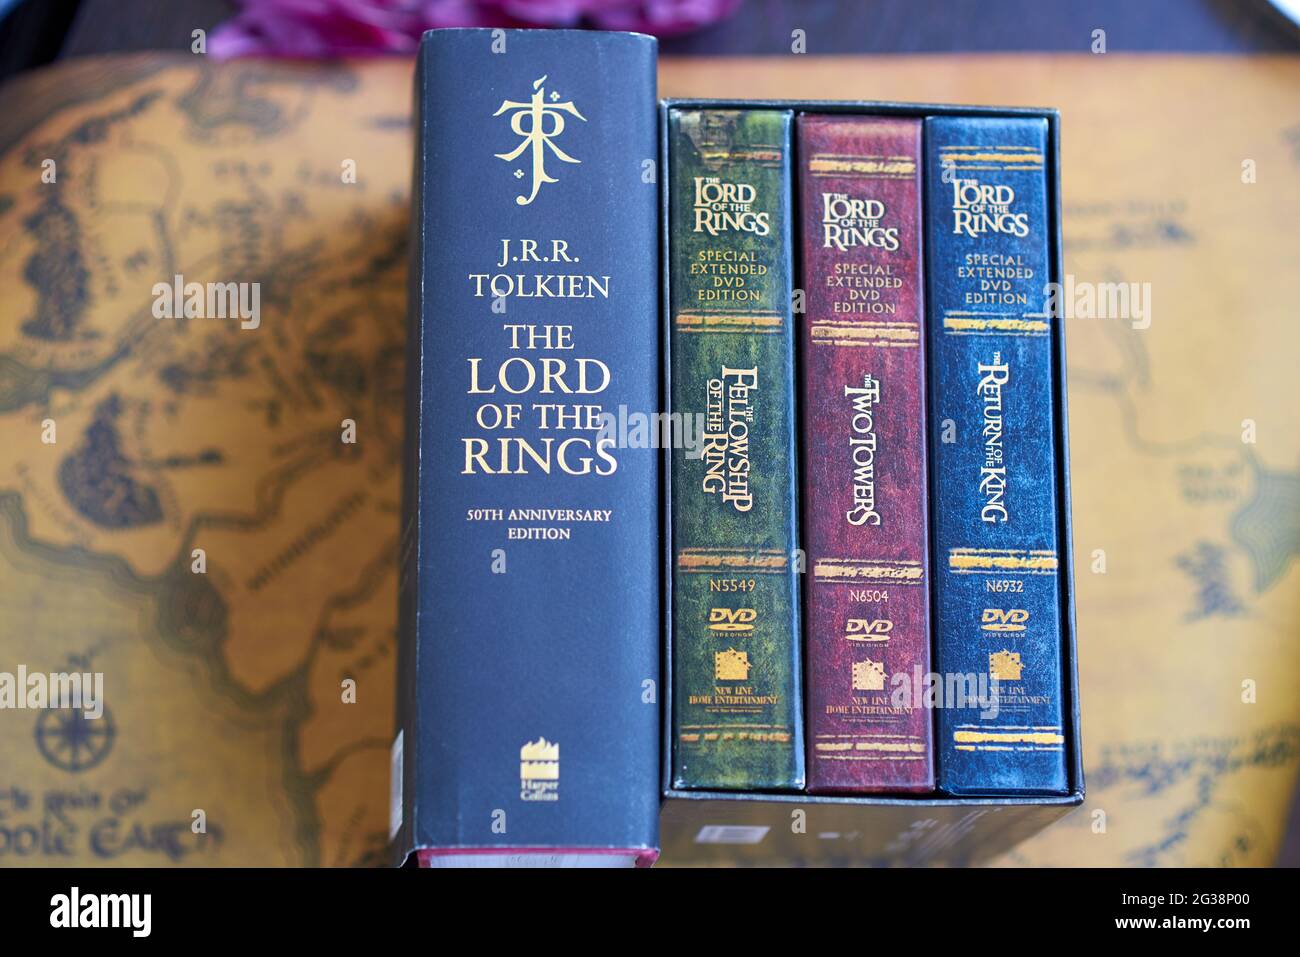 The Lord of the Rings Book and Trilogy Extended Edition 12-DVD Box Set Stock Photo